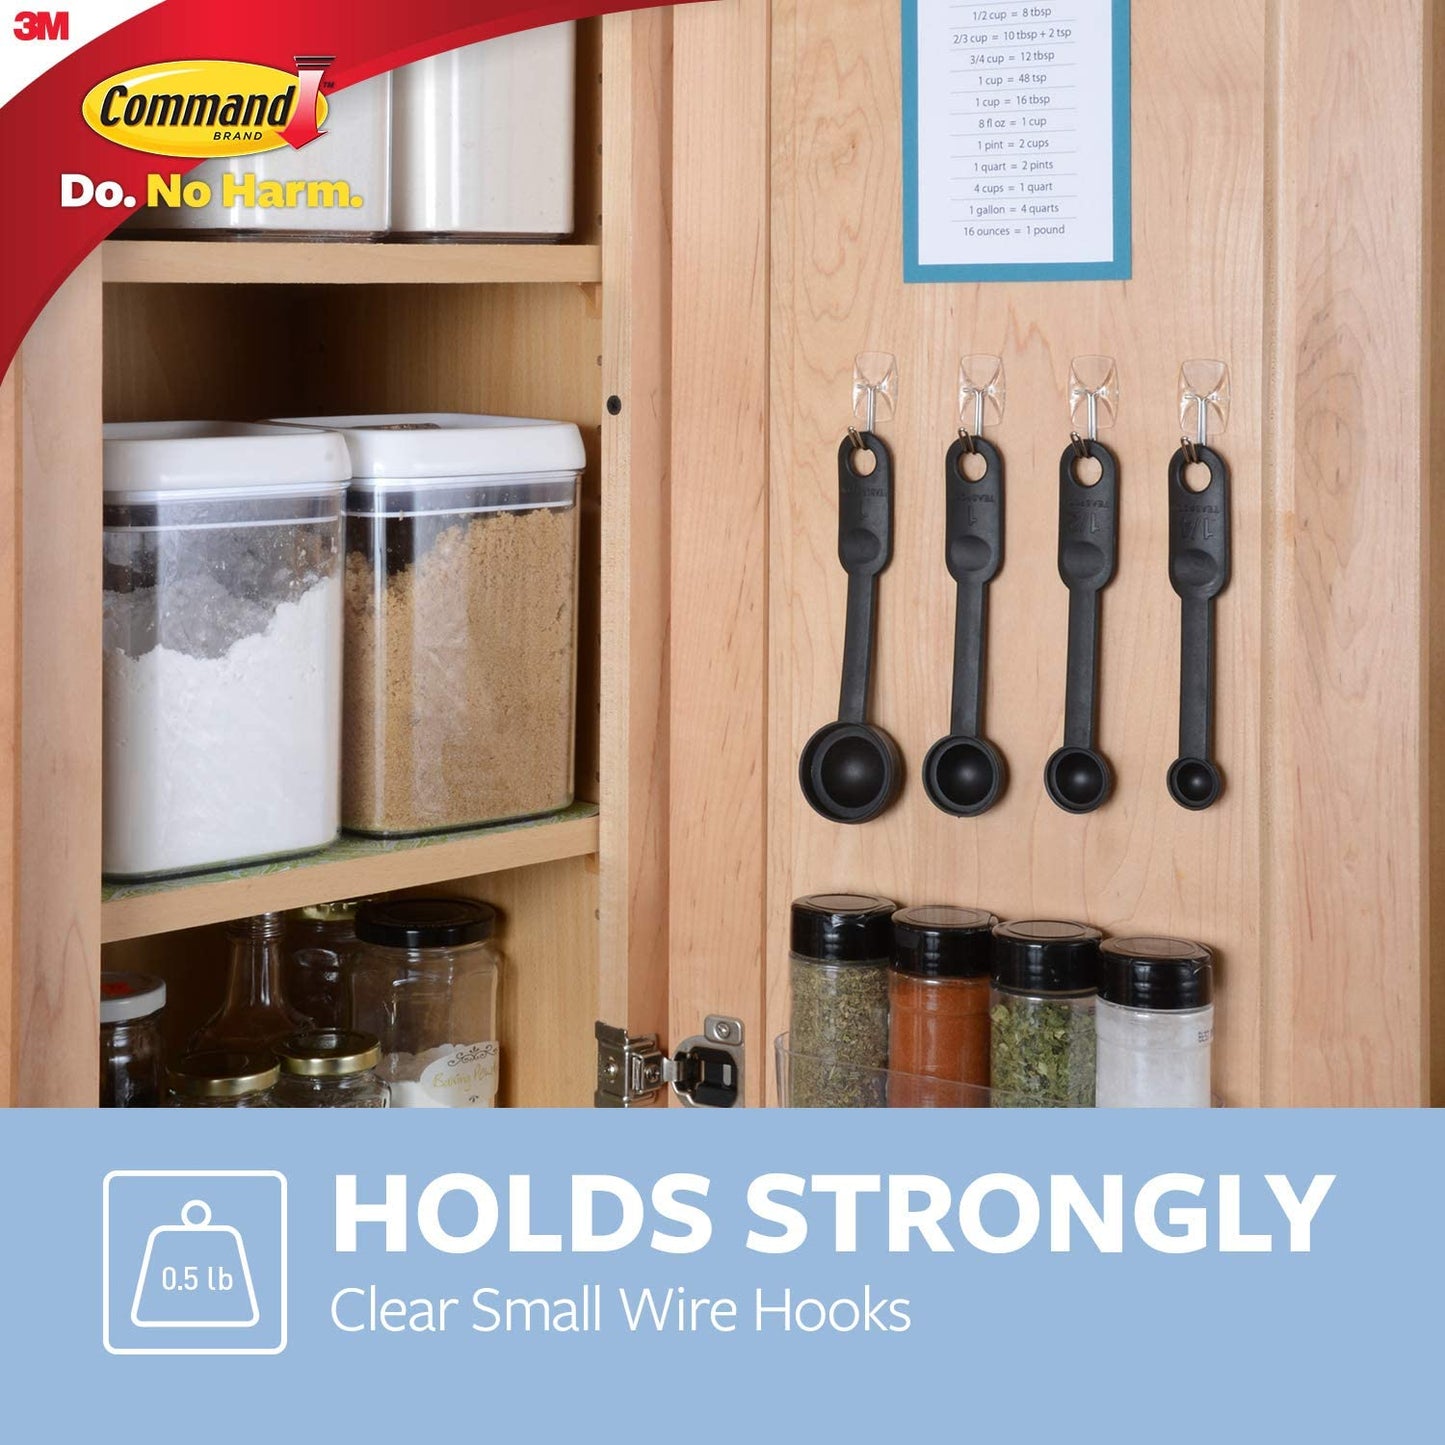 Command Clear Hooks and Strips, Plastic/Wire, Small, 3 Hooks and 4 Strips Holds strongly Removes Cleanly